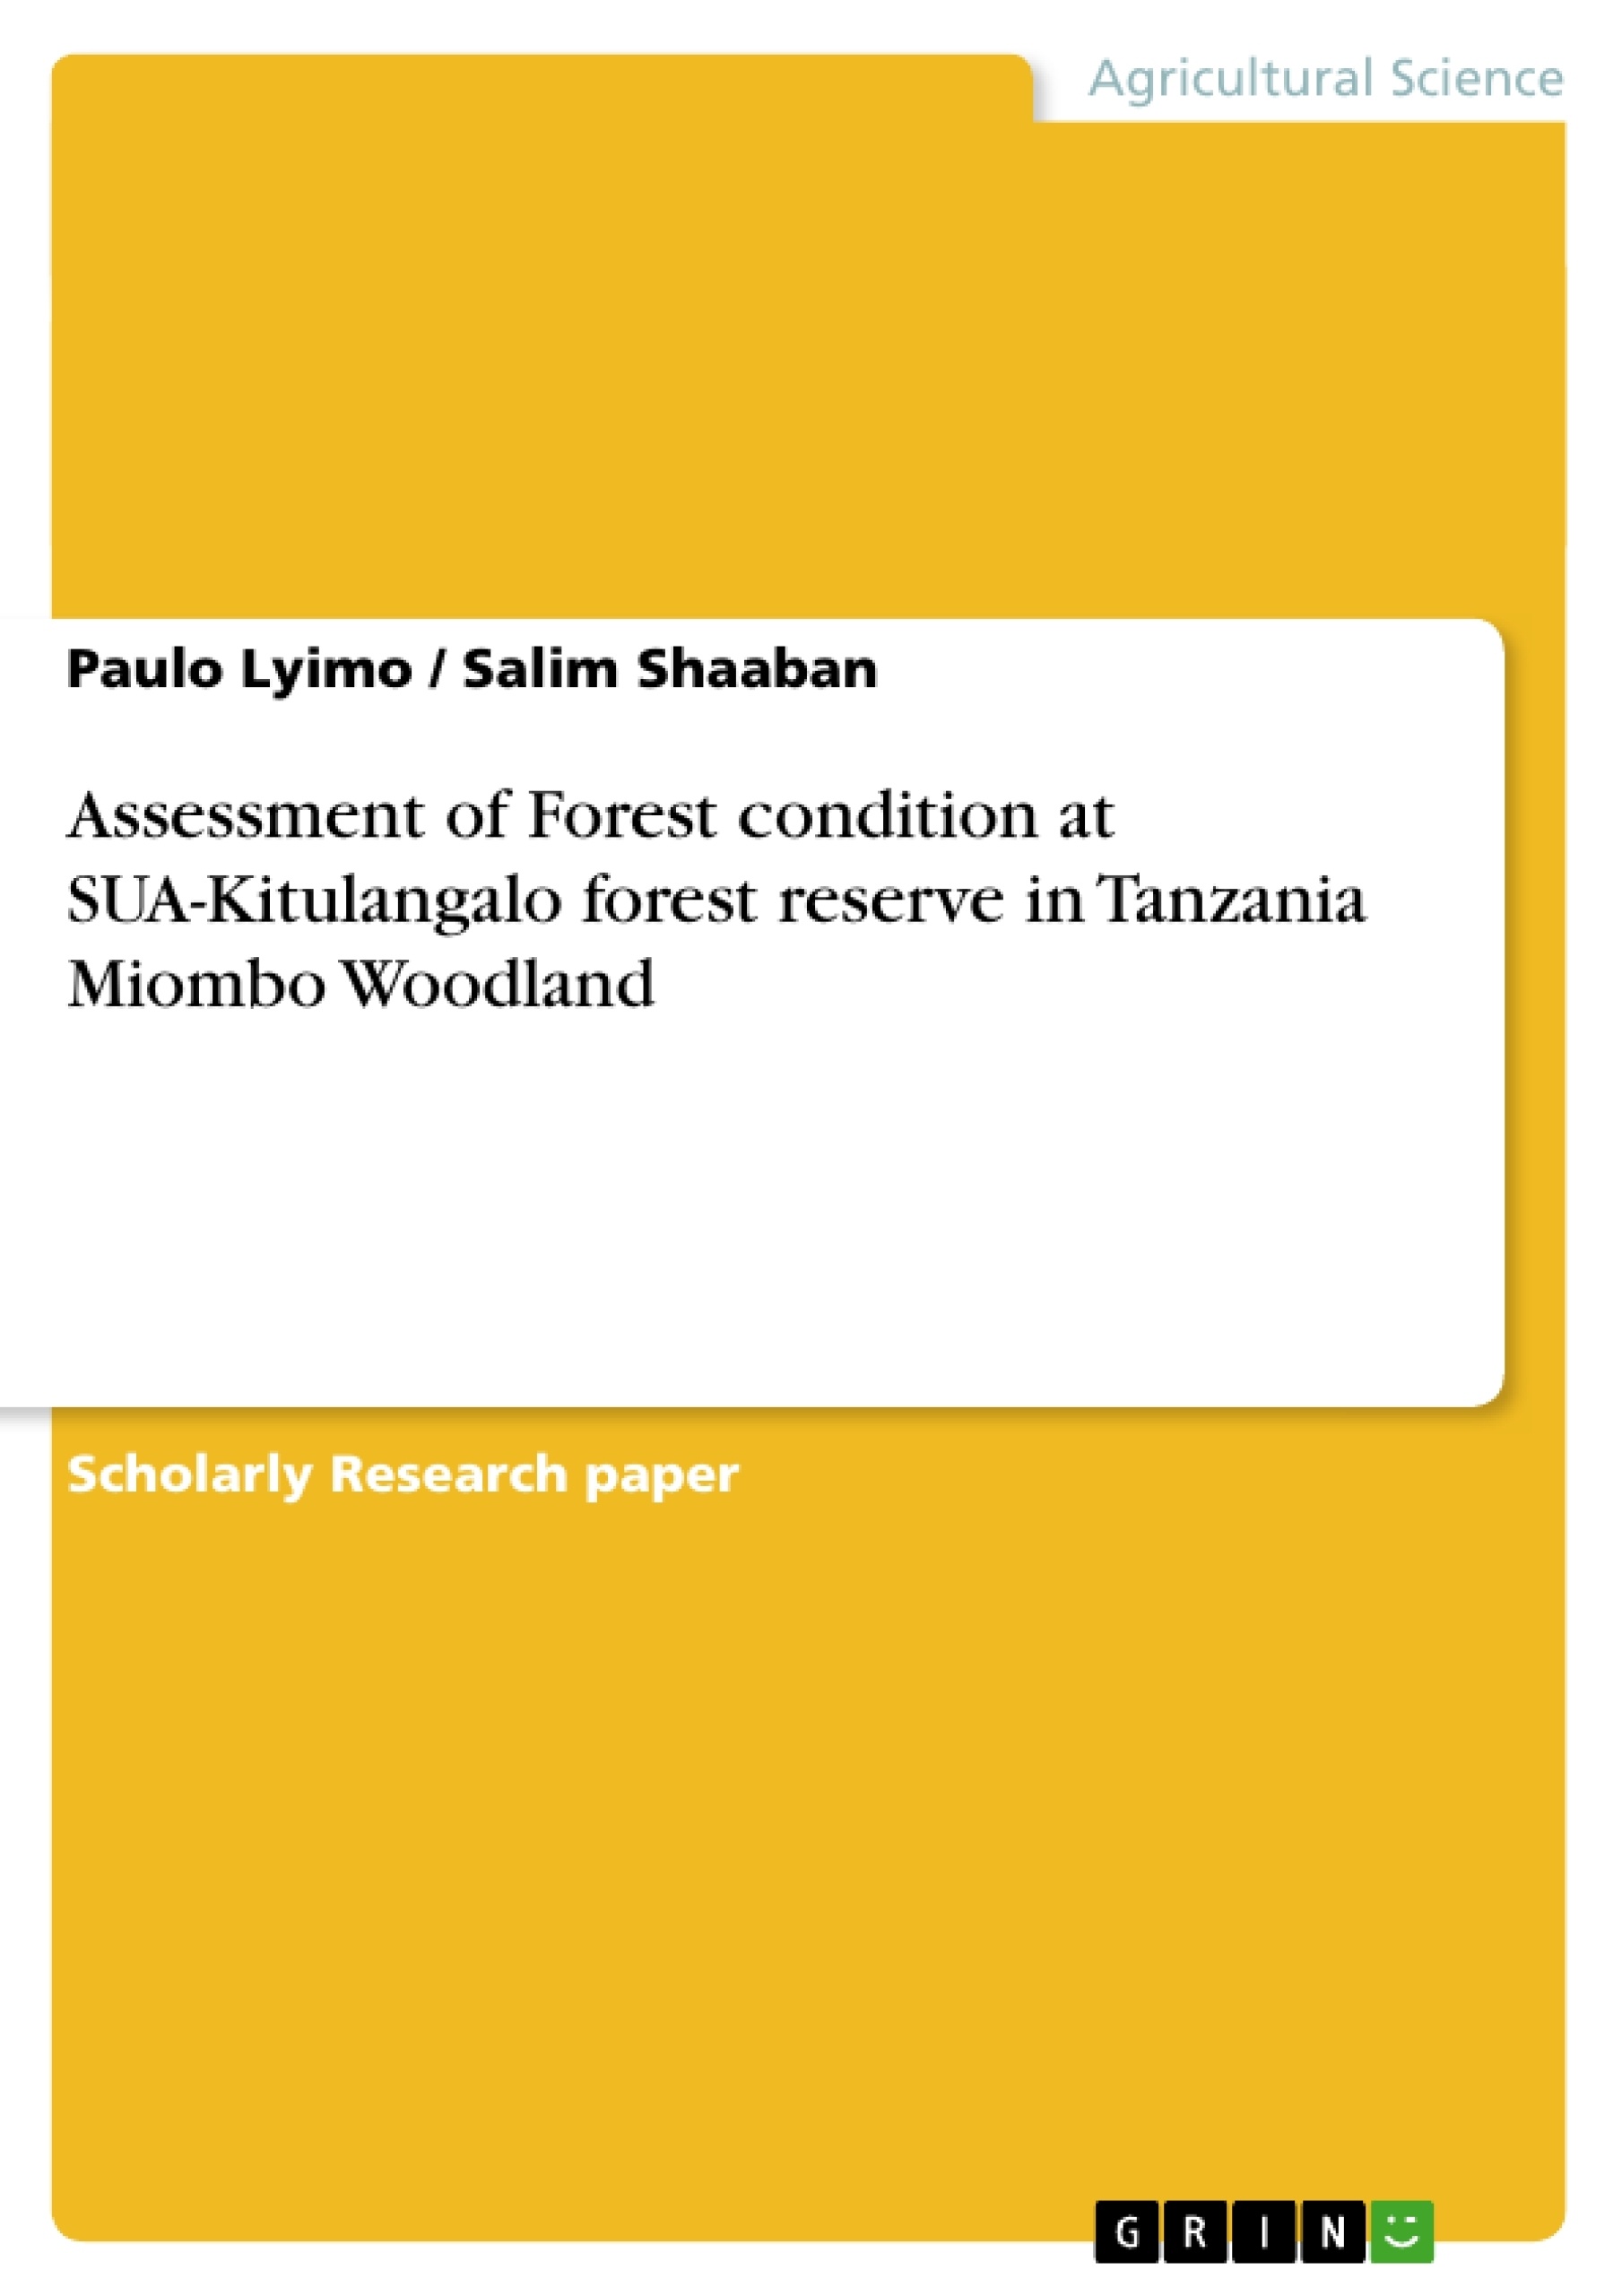 Titel: Assessment of Forest condition at SUA-Kitulangalo forest reserve in Tanzania Miombo Woodland